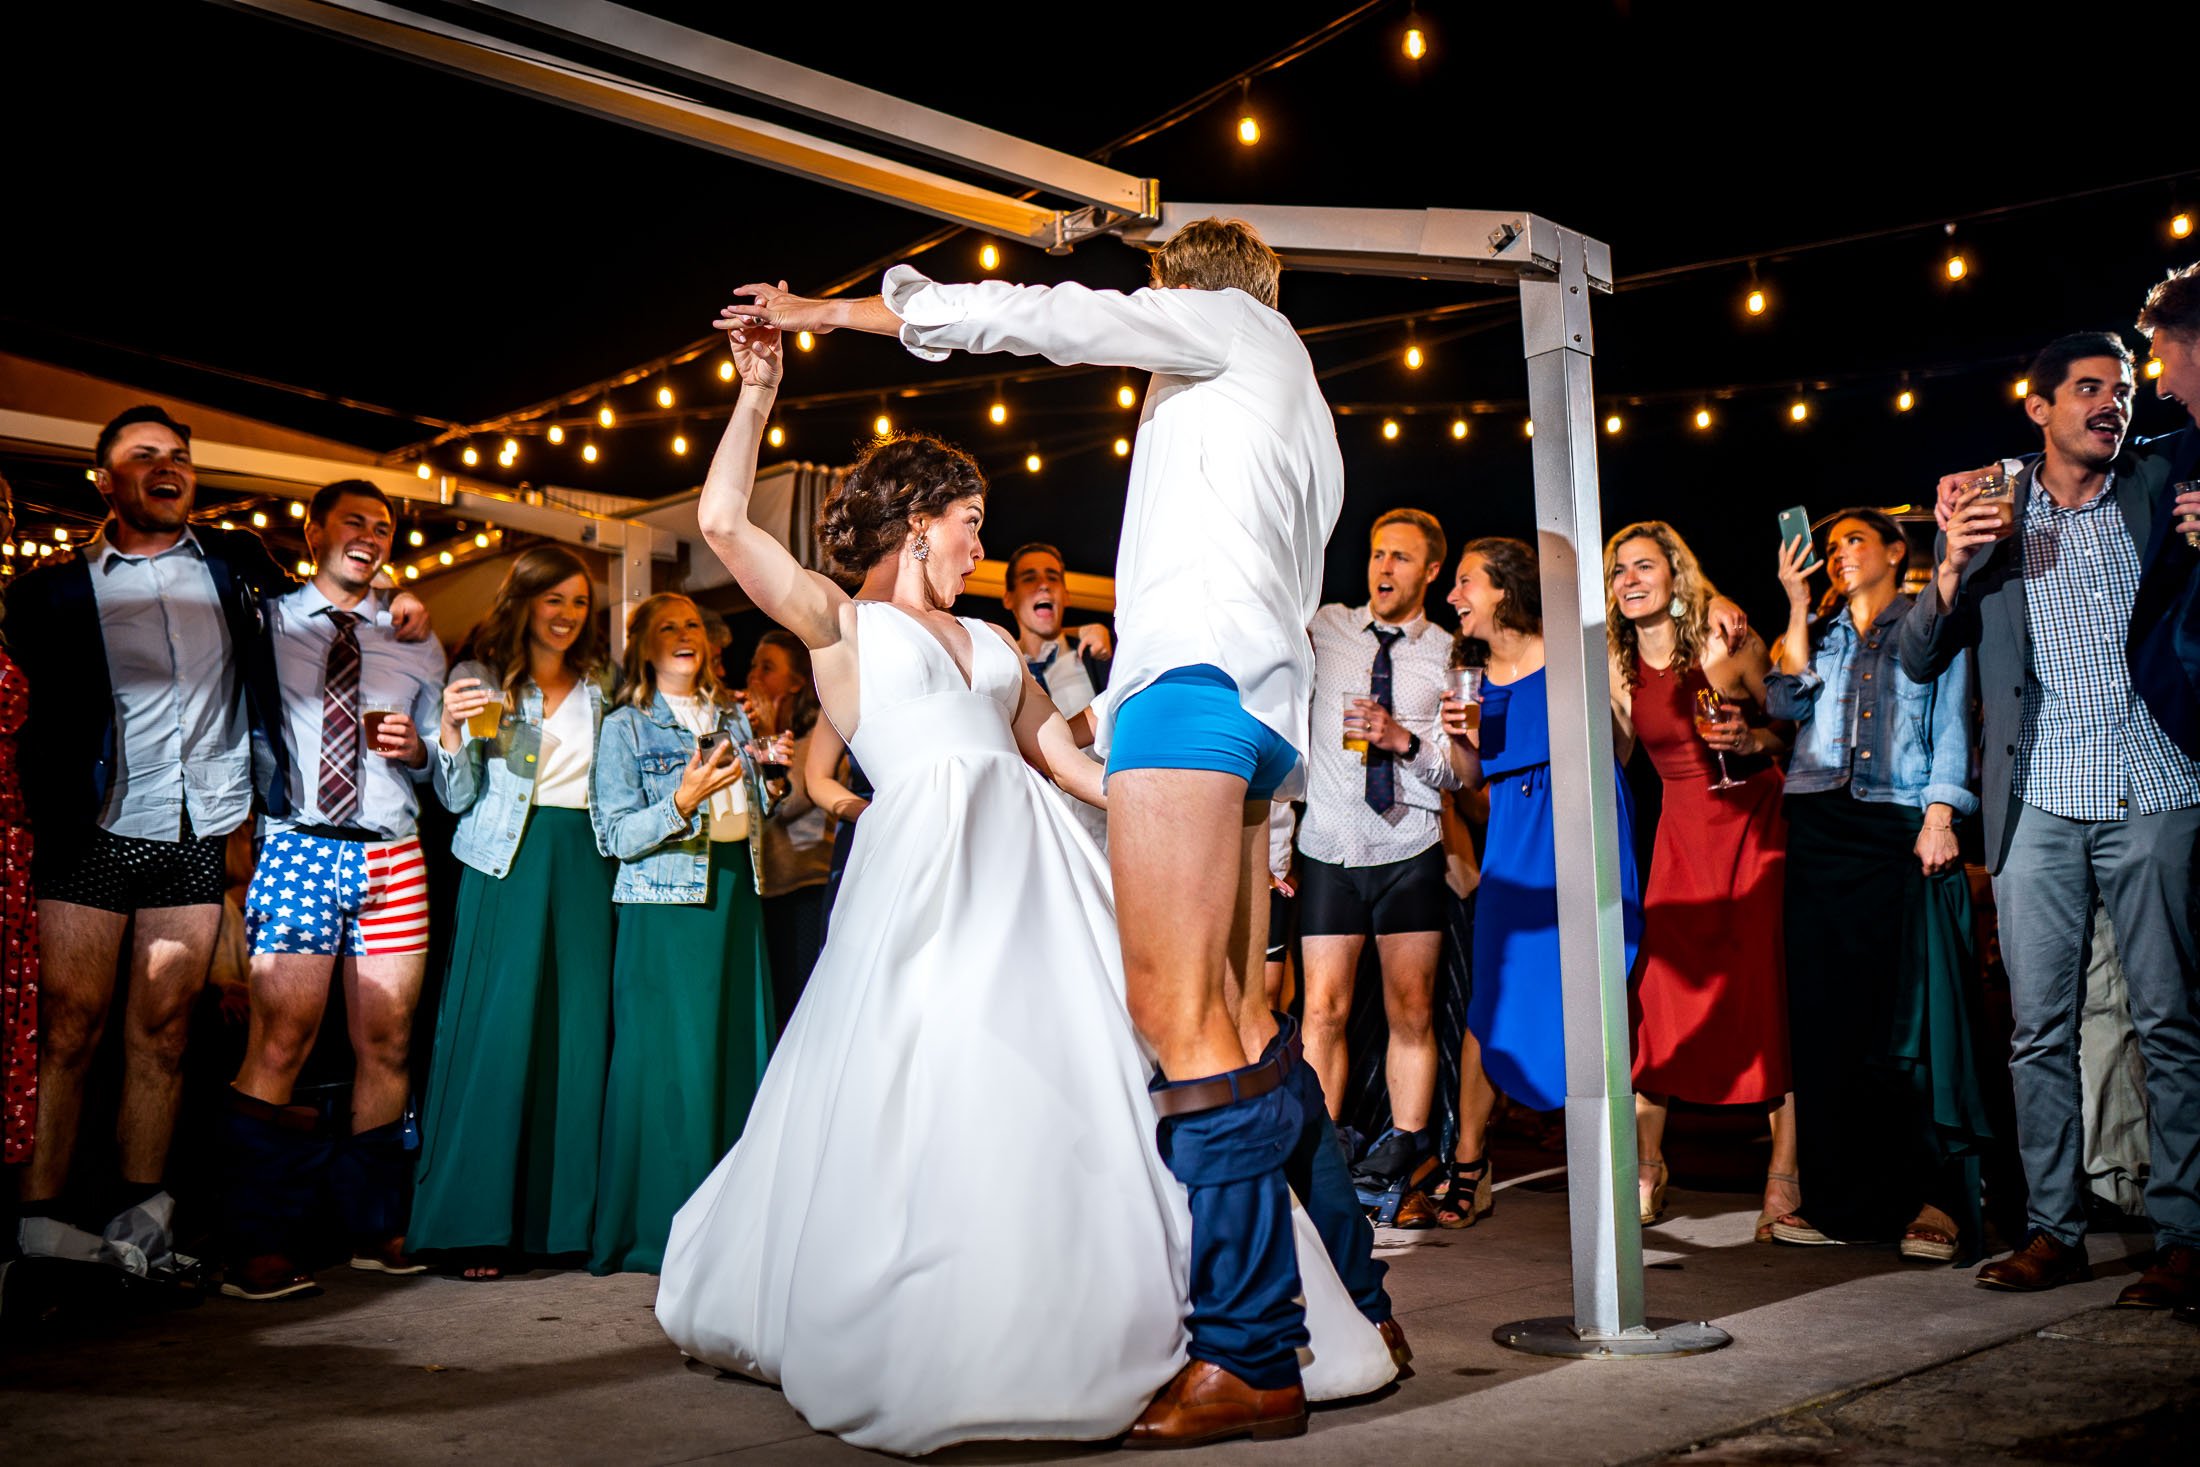 Bride and groom dance together while groom is wearing only his boxers on the outdoor patio under cafe lights during the wedding reception, wedding, wedding photos, wedding photography, wedding photographer, wedding inspiration, wedding photo inspiration, wedding portraits, wedding ceremony, wedding reception, mountain wedding, Catholic Church wedding, Catholic Church wedding photos, Catholic Church wedding photography, Catholic Church wedding photographer, Catholic Church wedding inspiration, Catholic Church wedding venue, Steamboat Springs wedding, Steamboat Springs wedding photos, Steamboat Springs wedding photography, Steamboat Springs wedding photographer, Colorado wedding, Colorado wedding photos, Colorado wedding photography, Colorado wedding photographer, Colorado mountain wedding, Colorado wedding inspiration